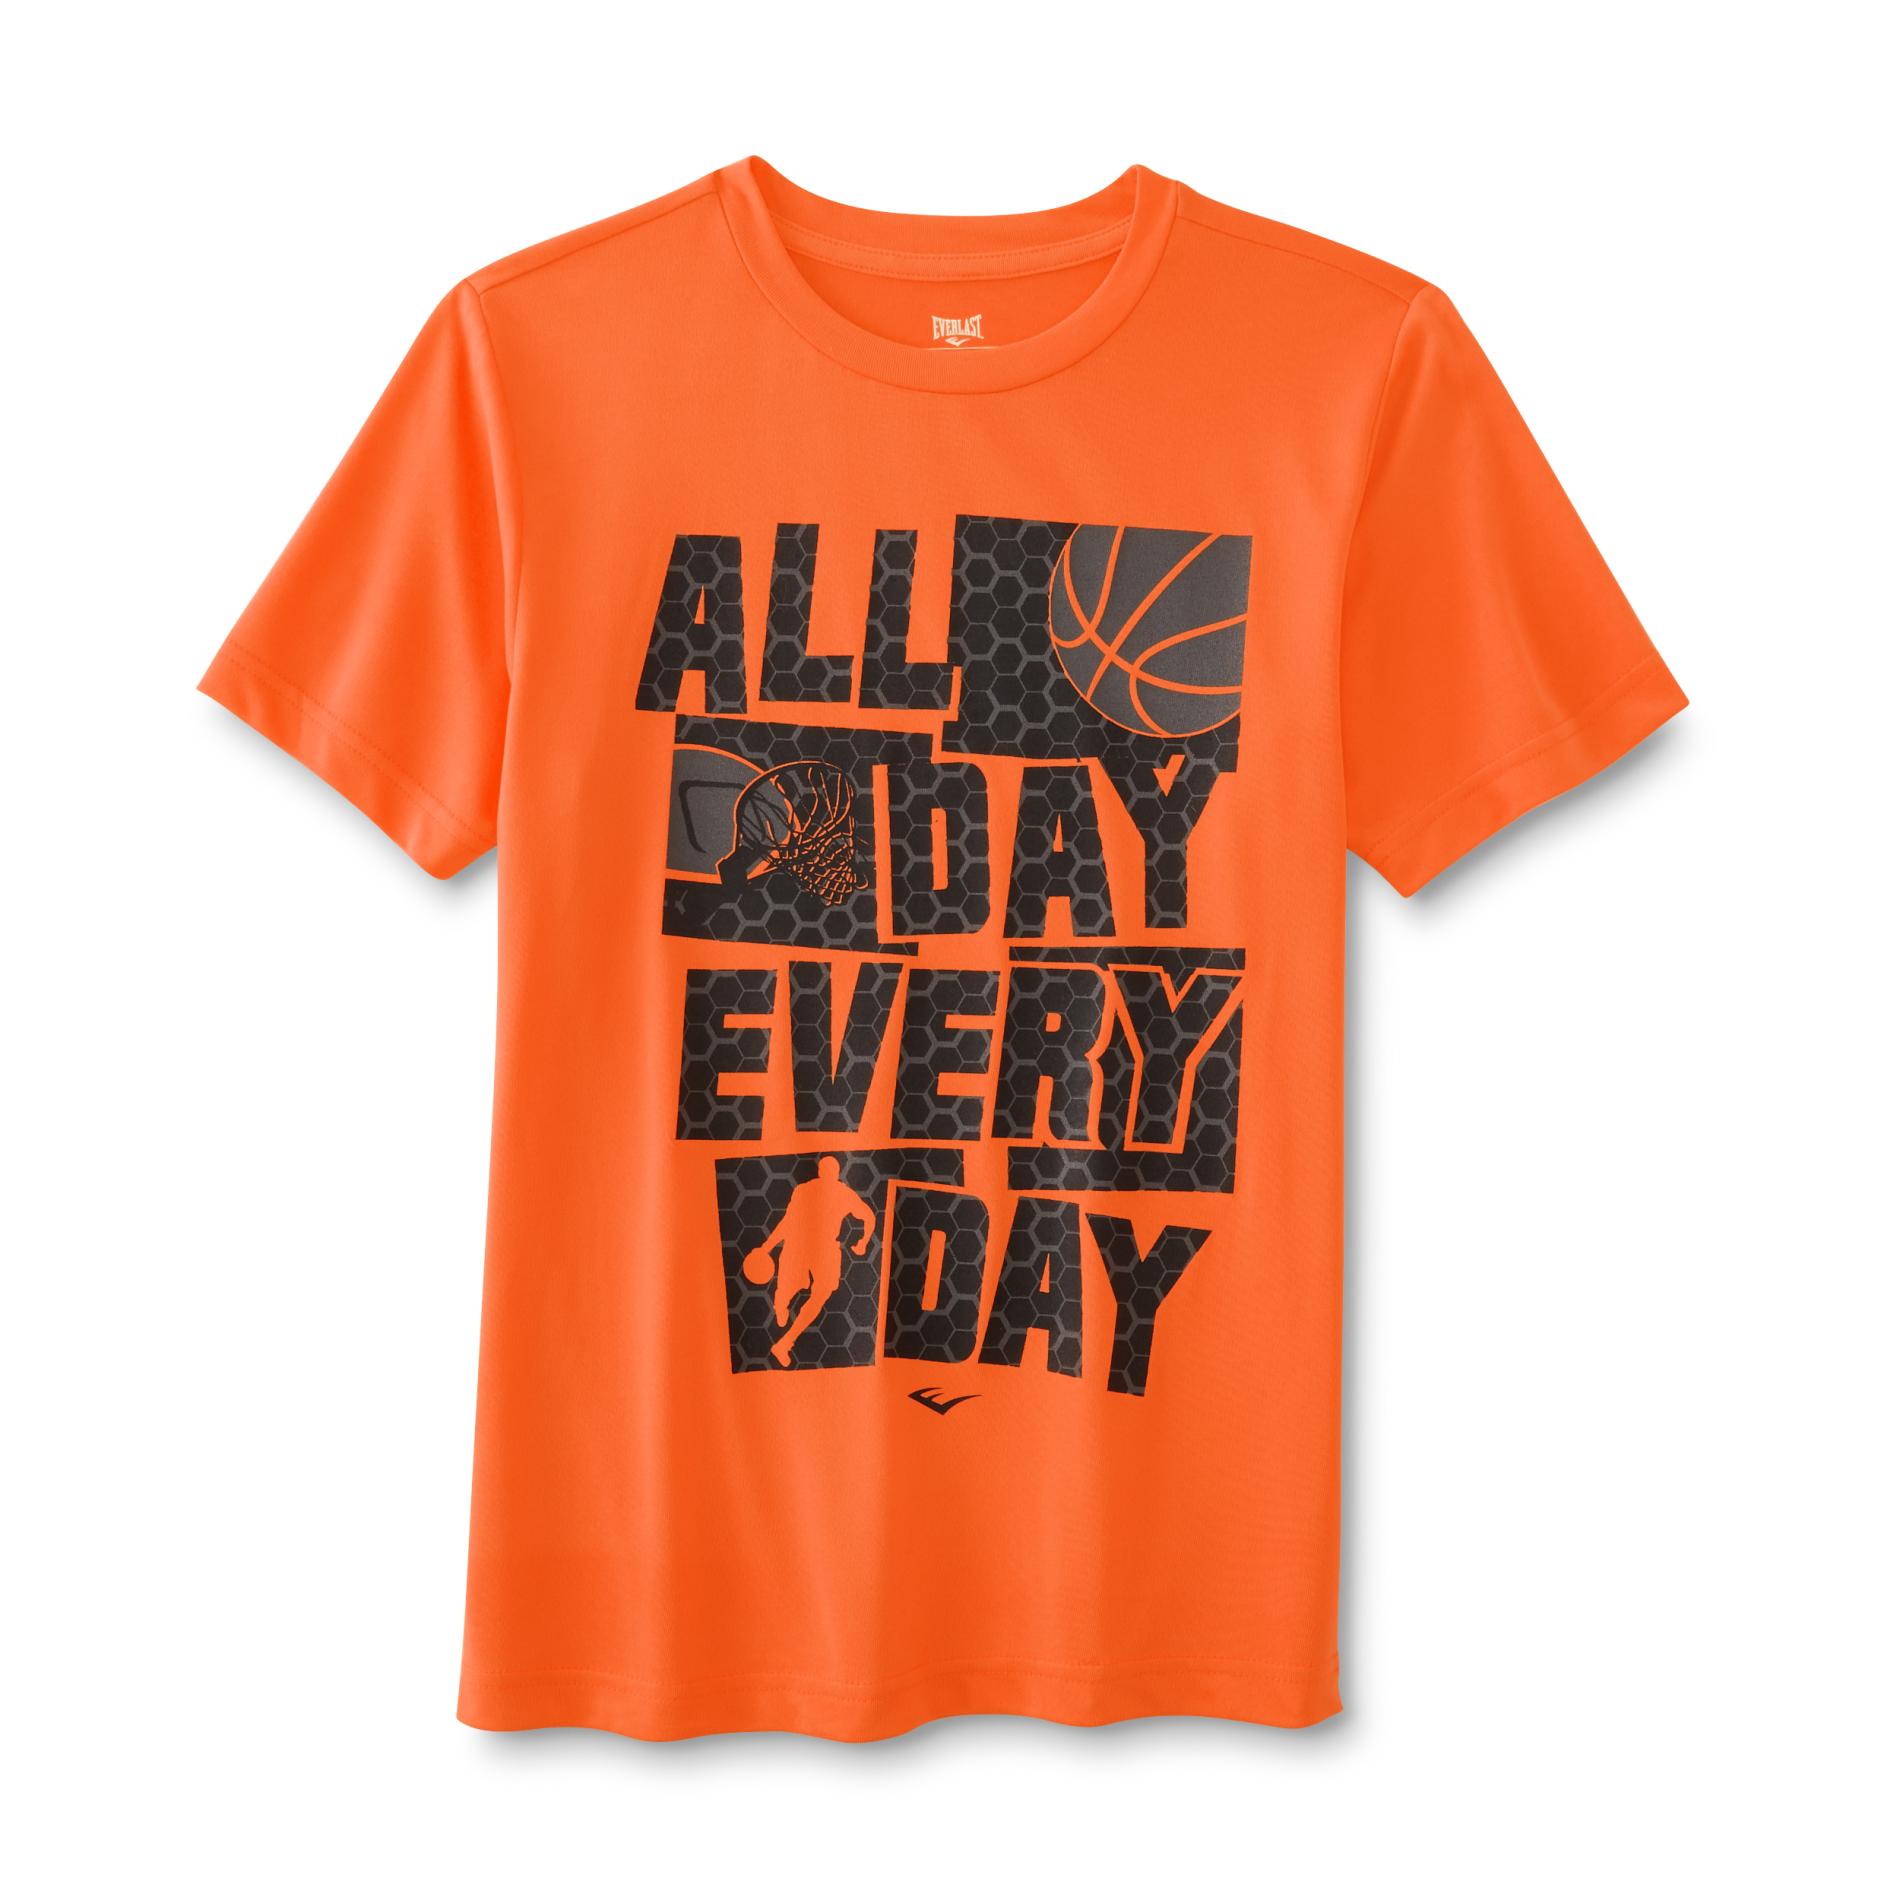 Everlast&reg; Boys' Graphic Athletic T-Shirt - All Day Every Day